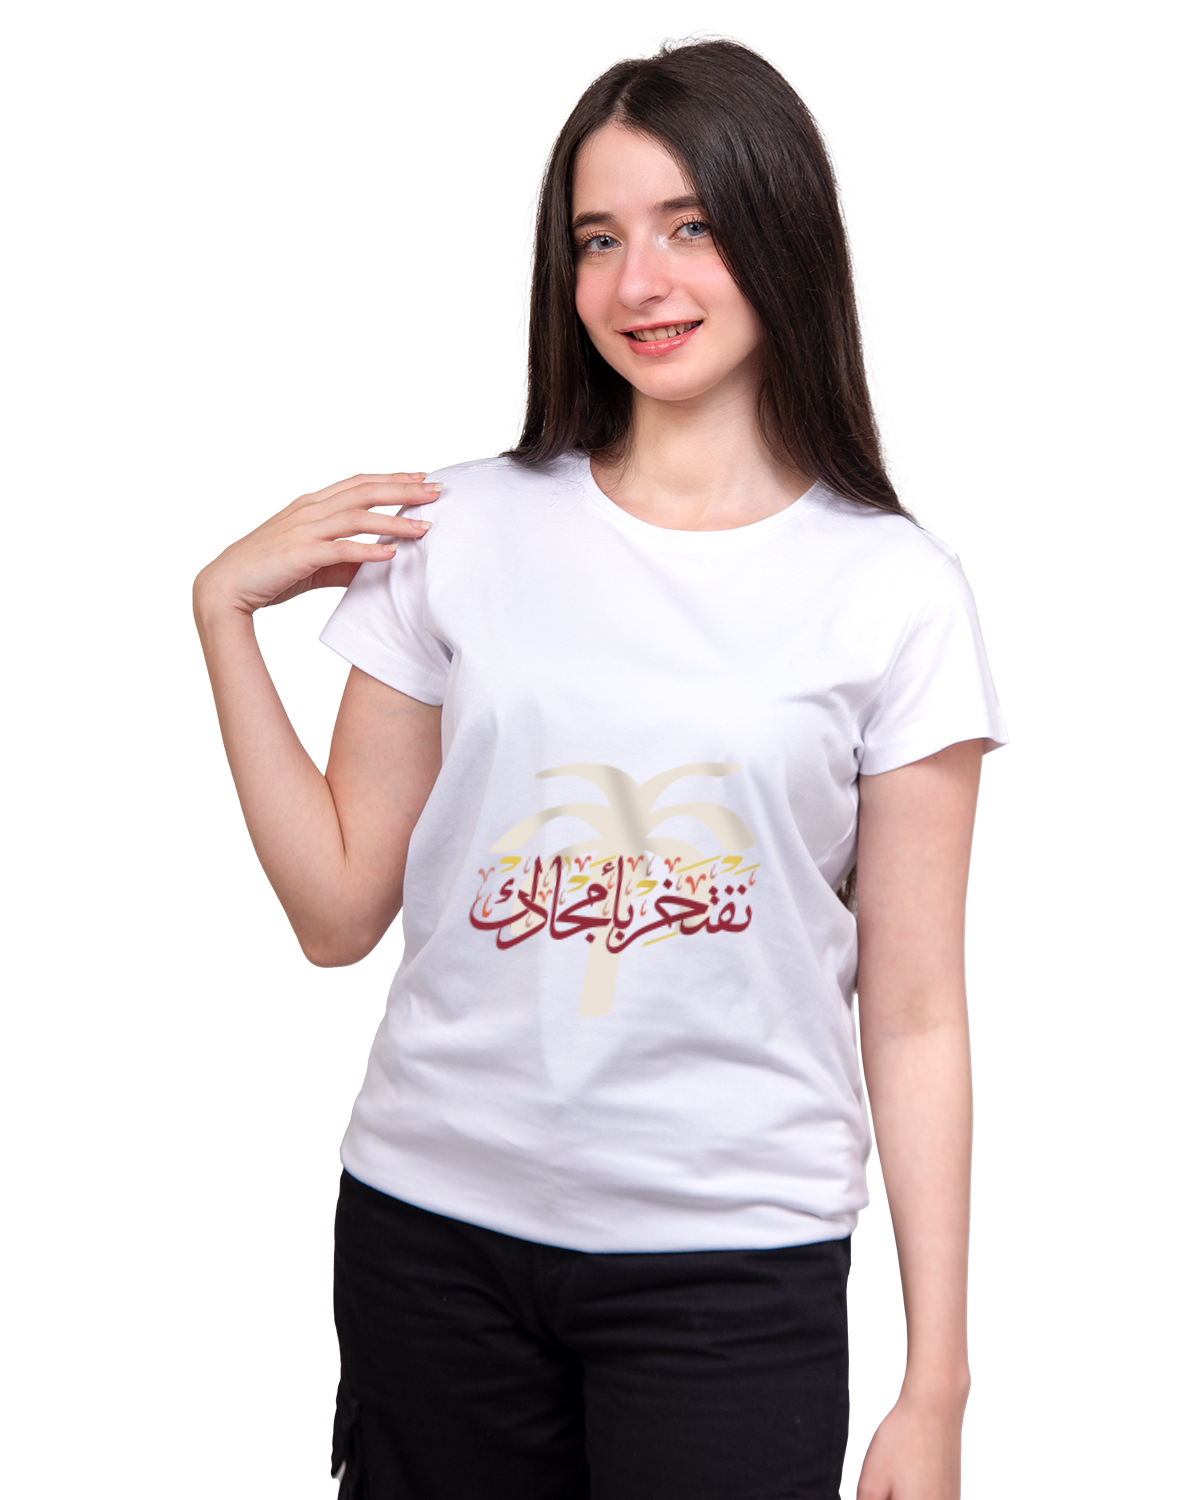 Women's Foundation Day T-Shirt (We Take Pride in Your Glories)